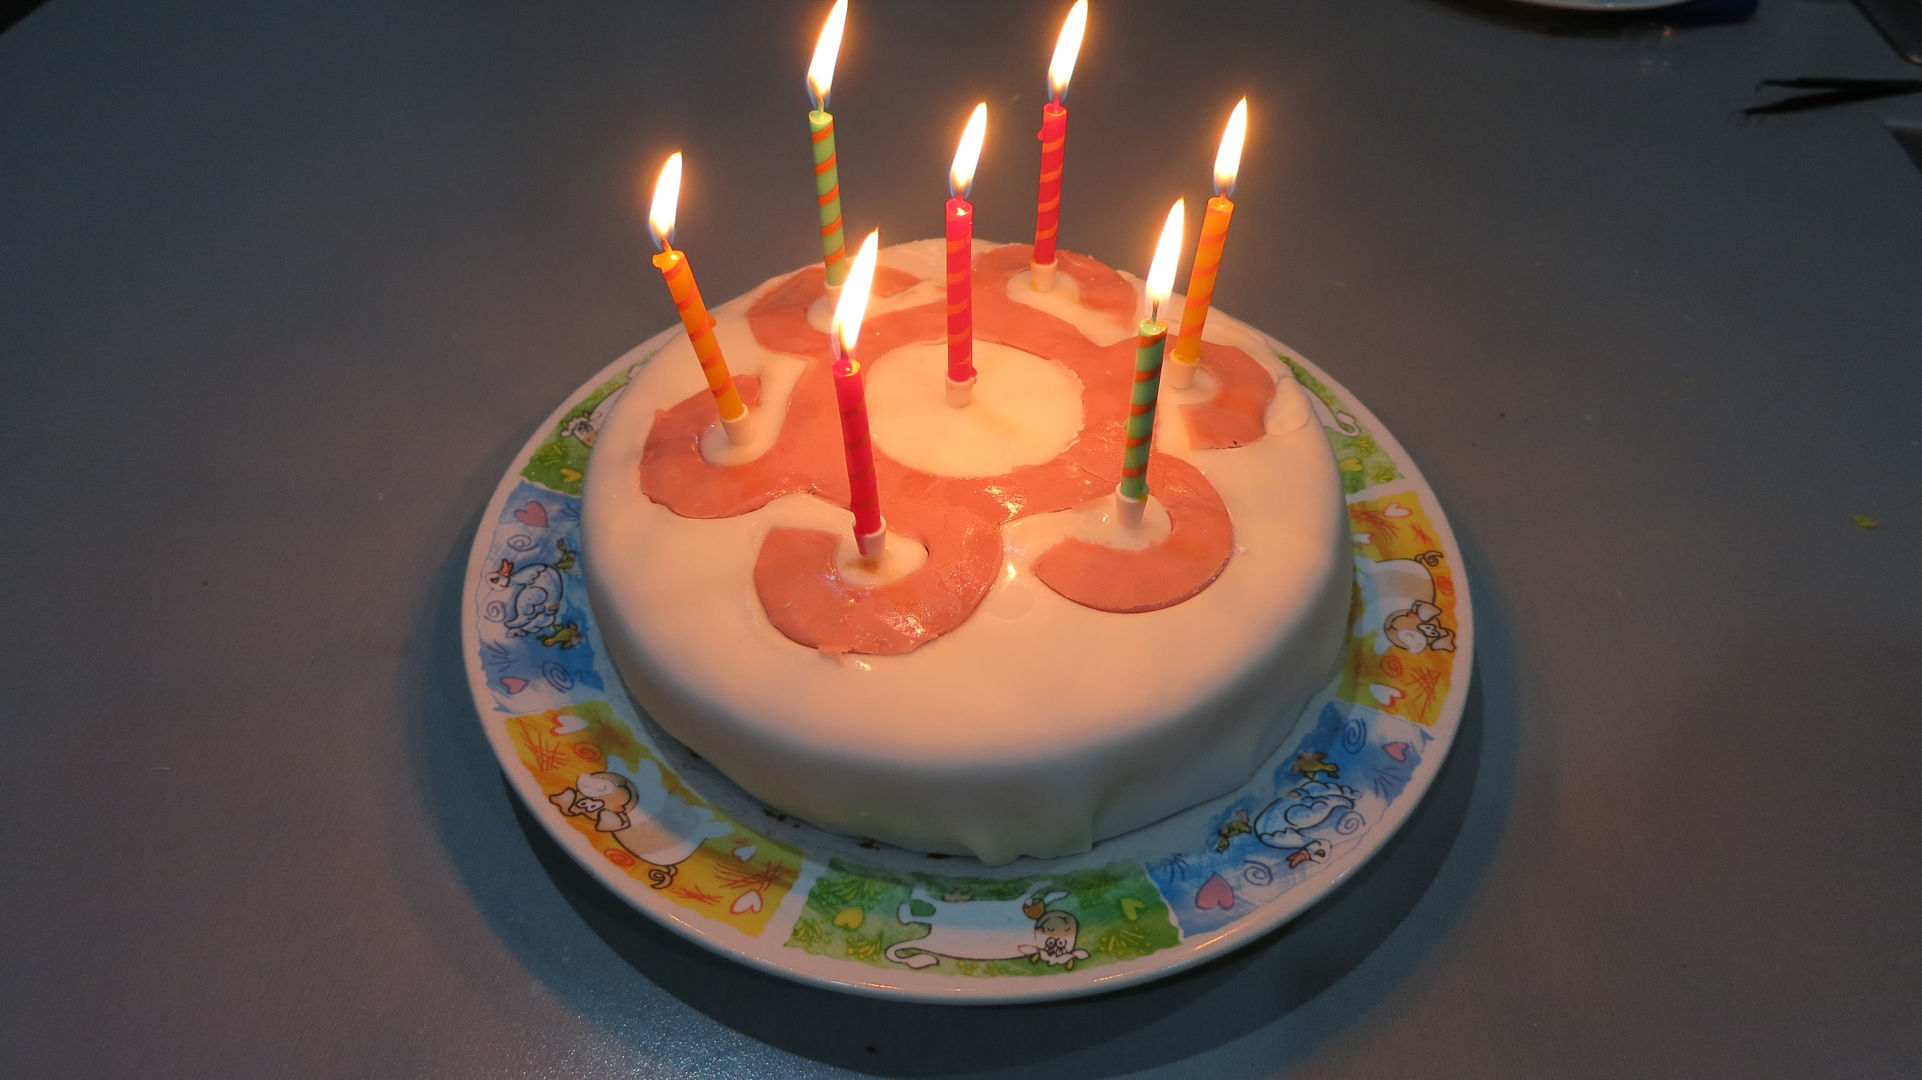 A picture of a cake with candles.